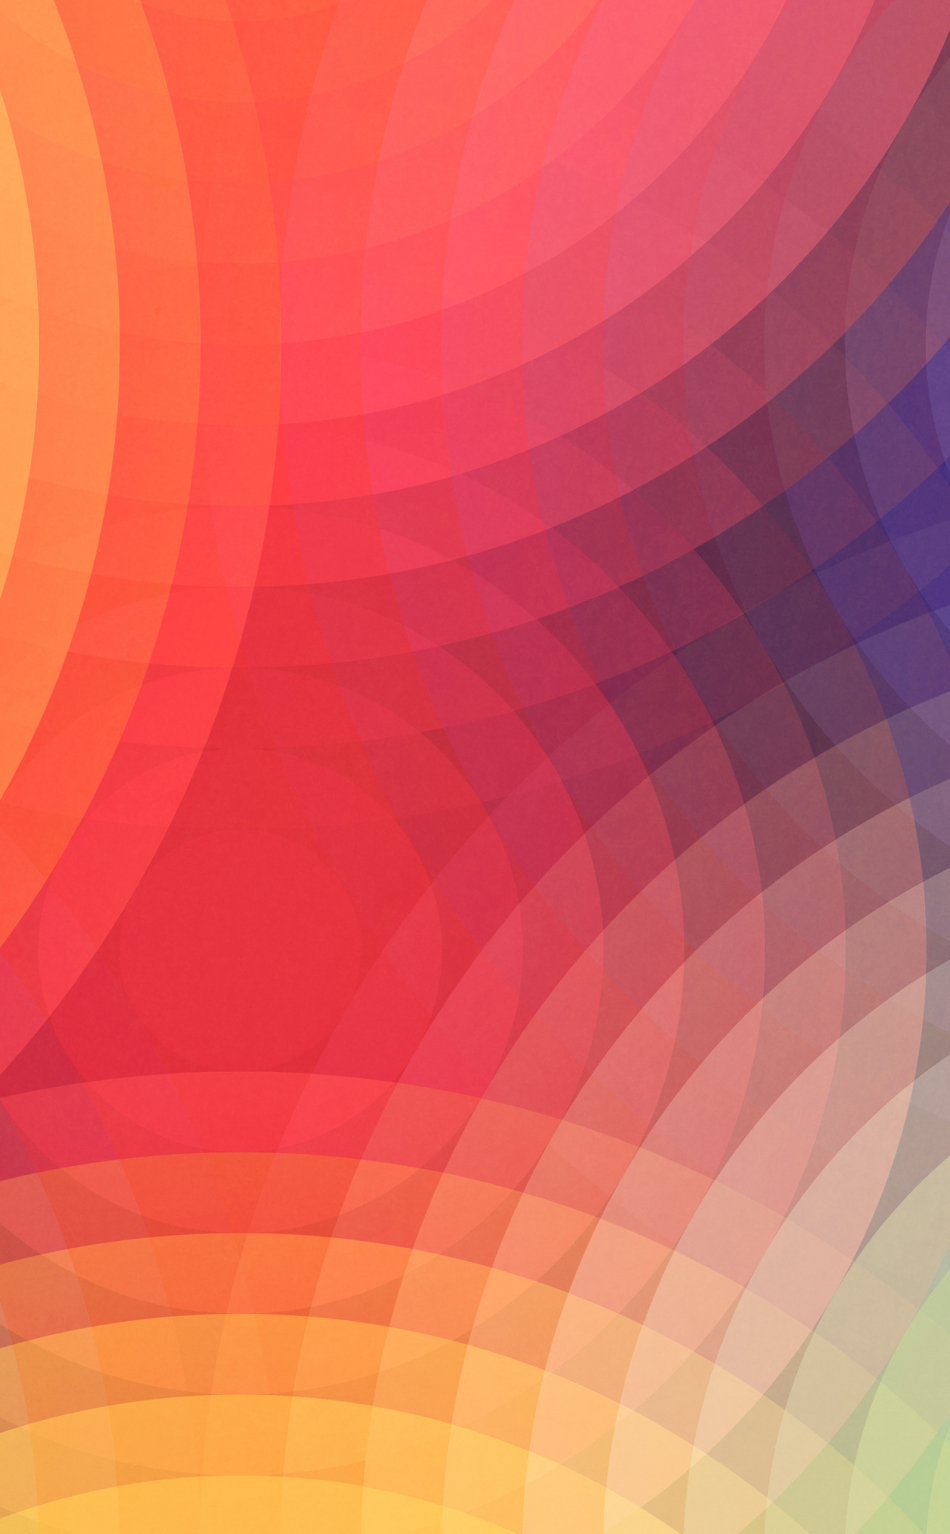 Download Circles Colorful Multicolor Nexus 7 Stock 950x1534 Wallpaper Iphone 950x1534 Hd Image Background 254